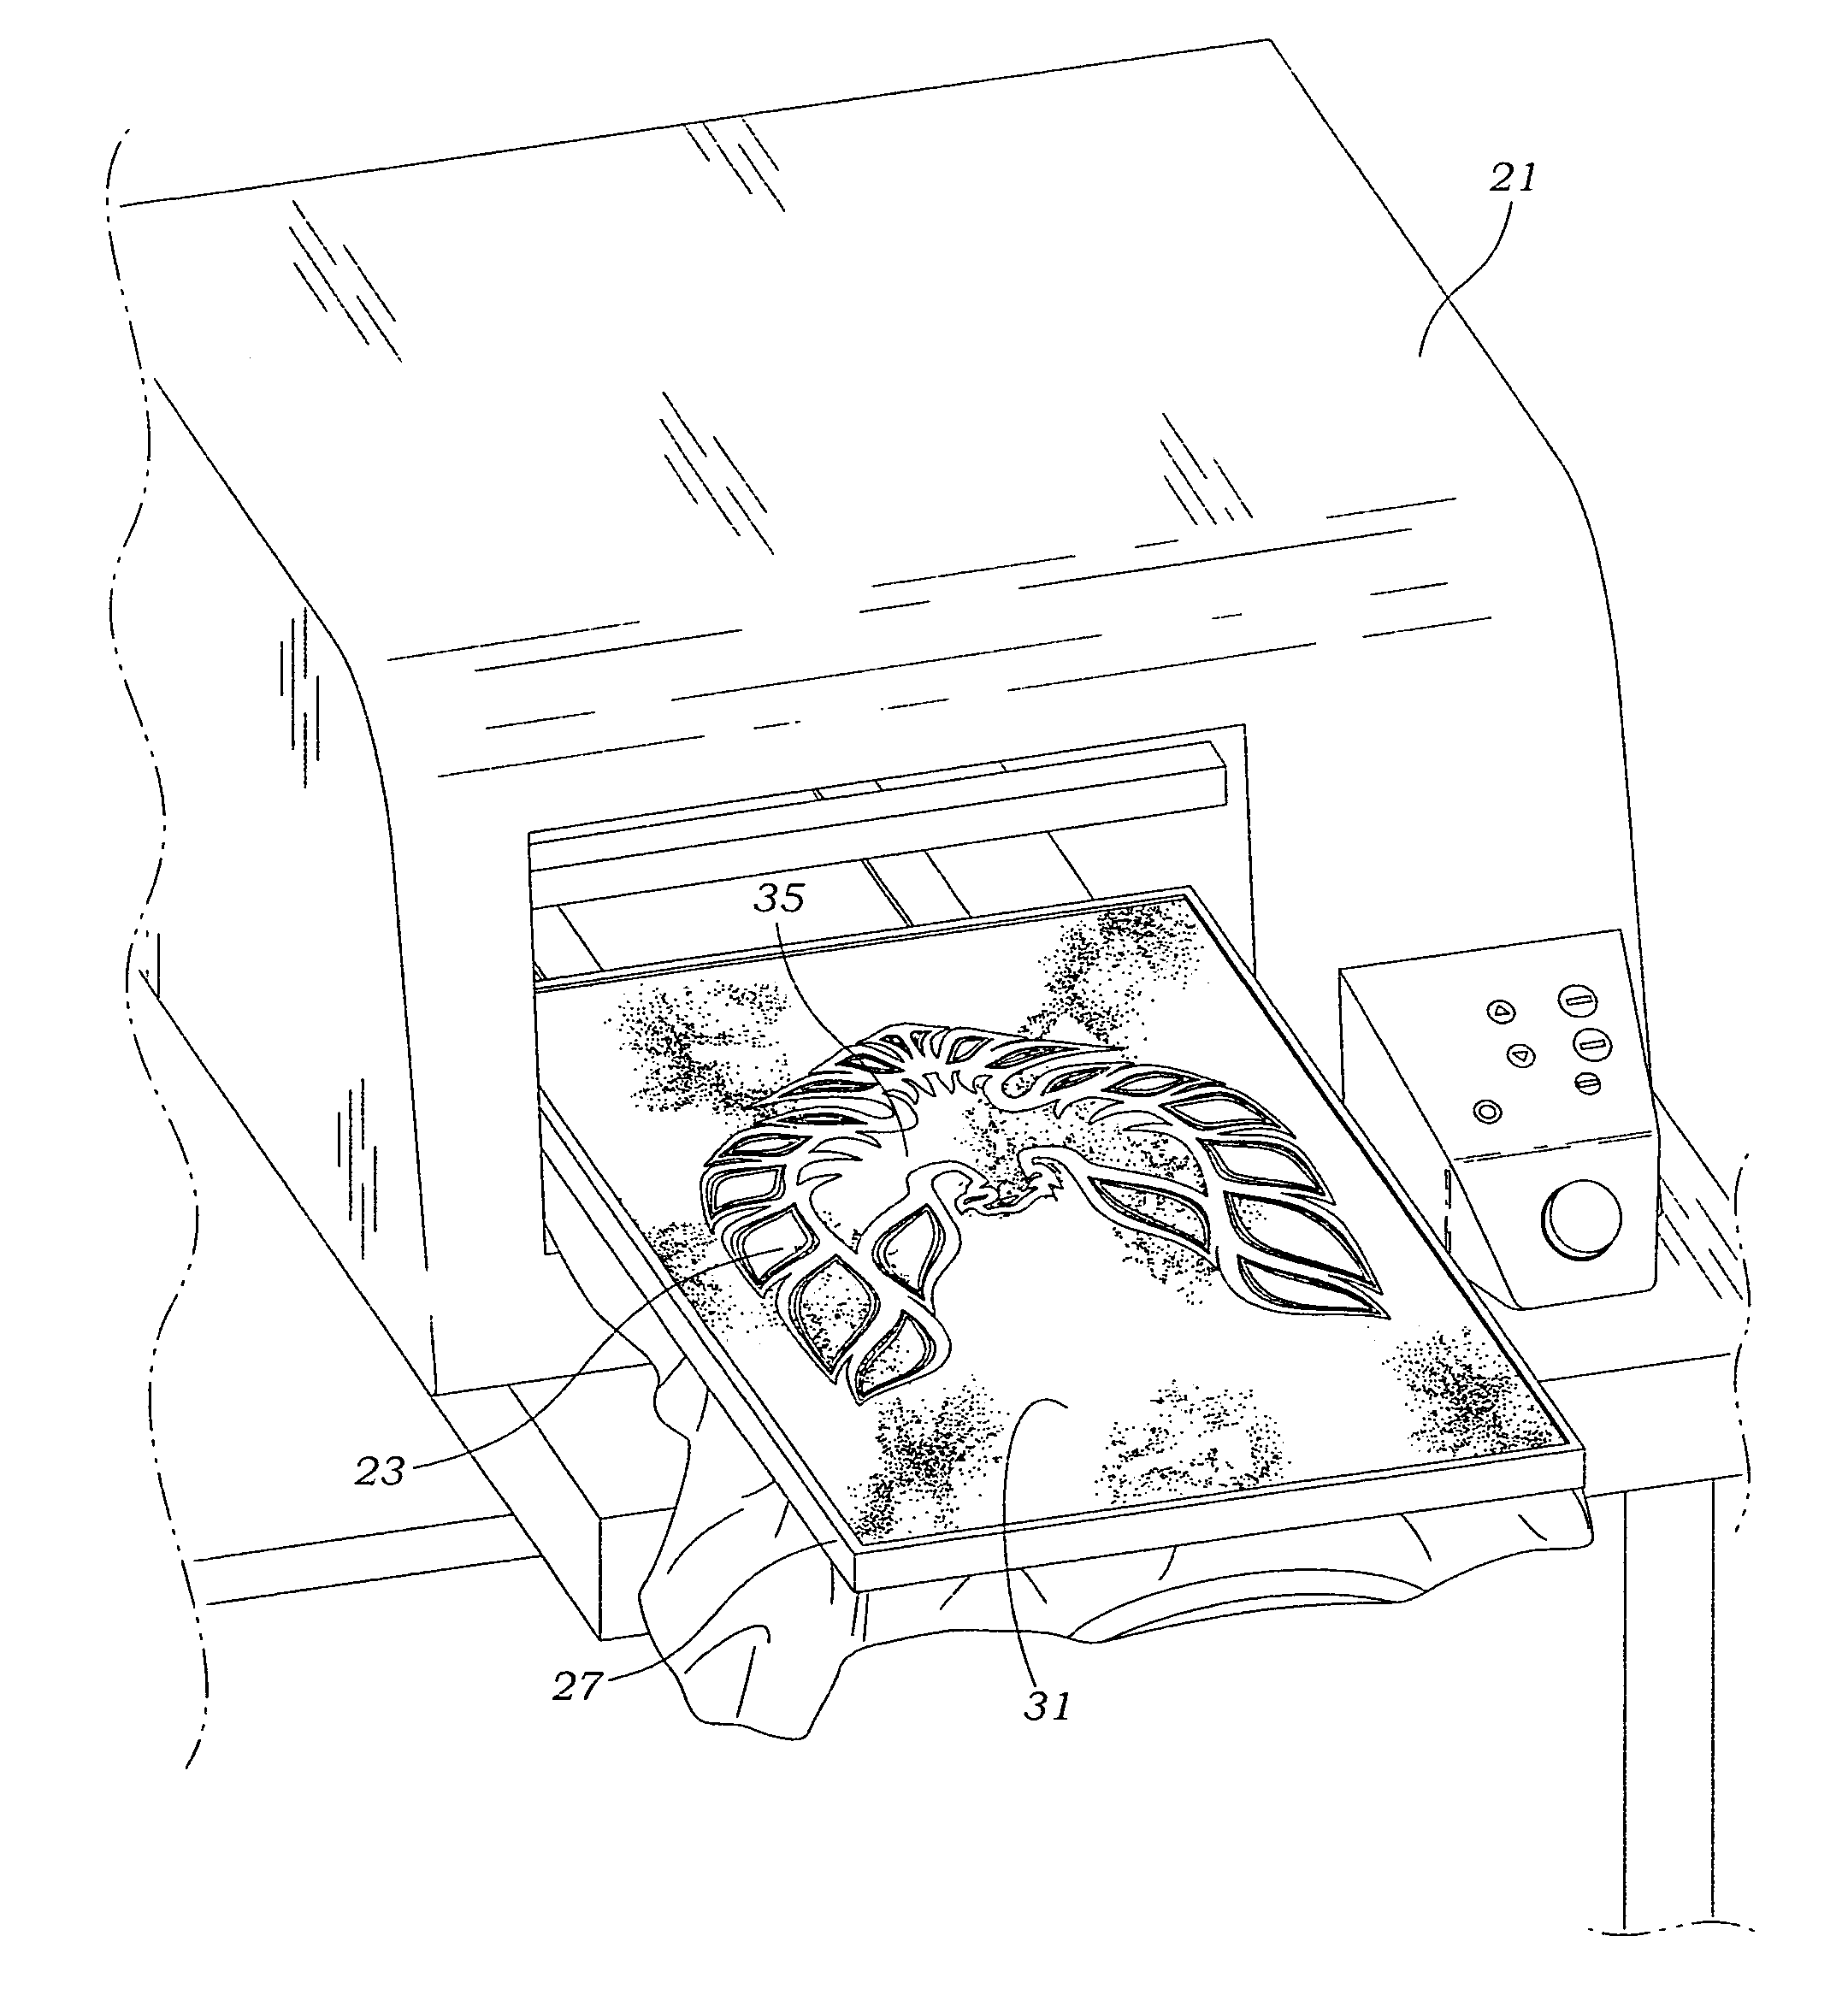 Method of printing foil images upon textiles